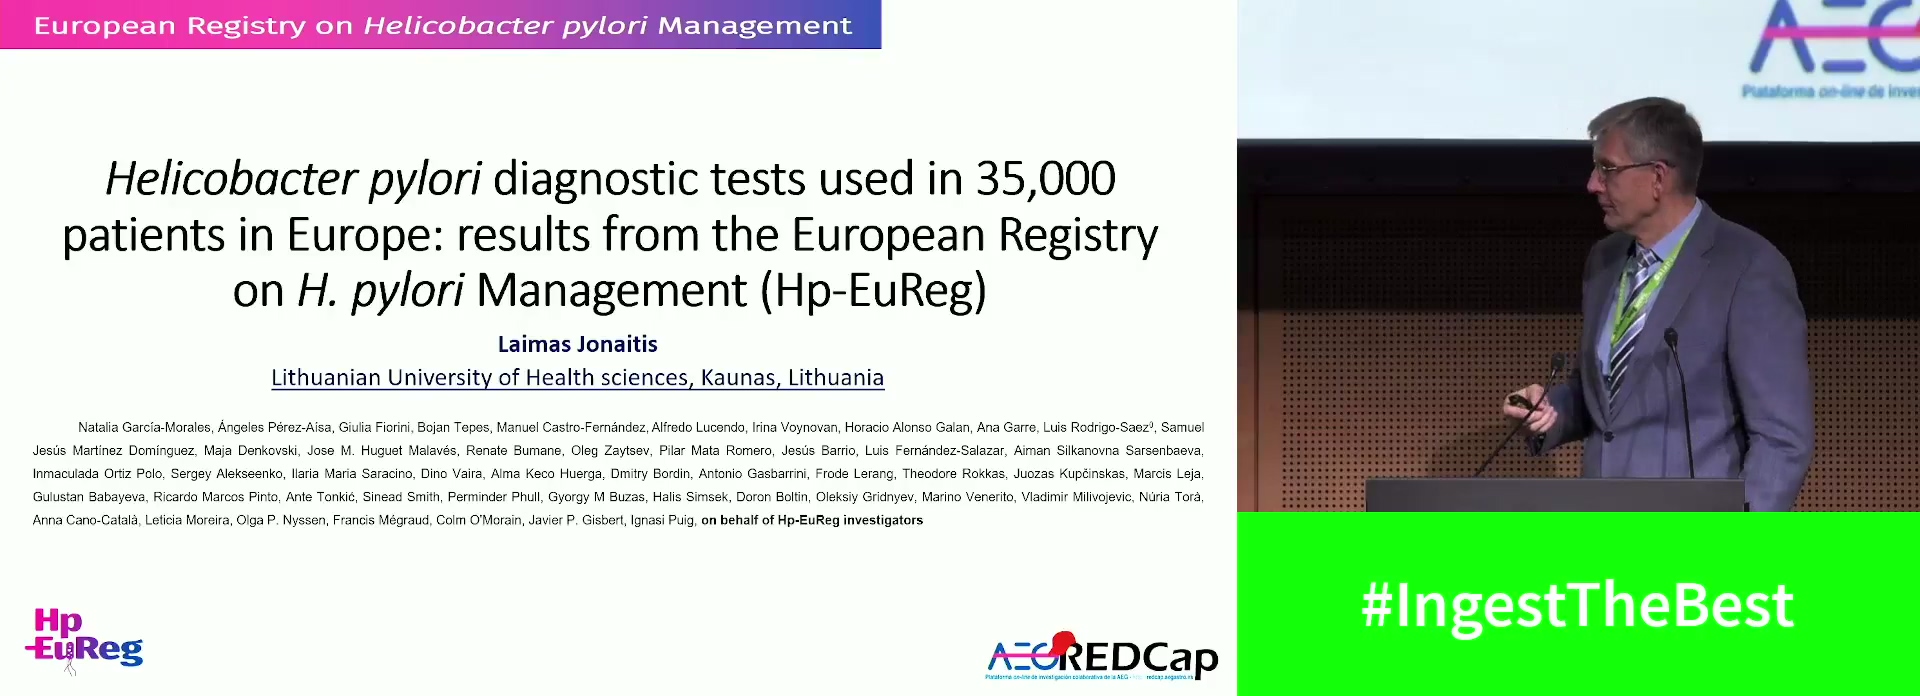 HELICOBACTER PYLORIDIAGNOSTIC TESTS USED IN 35,000 PATIENTS IN EUROPE: RESULTS FROM THE EUROPEAN REGISTRY ON H. PYLORIMANAGEMENT (HP-EUREG)